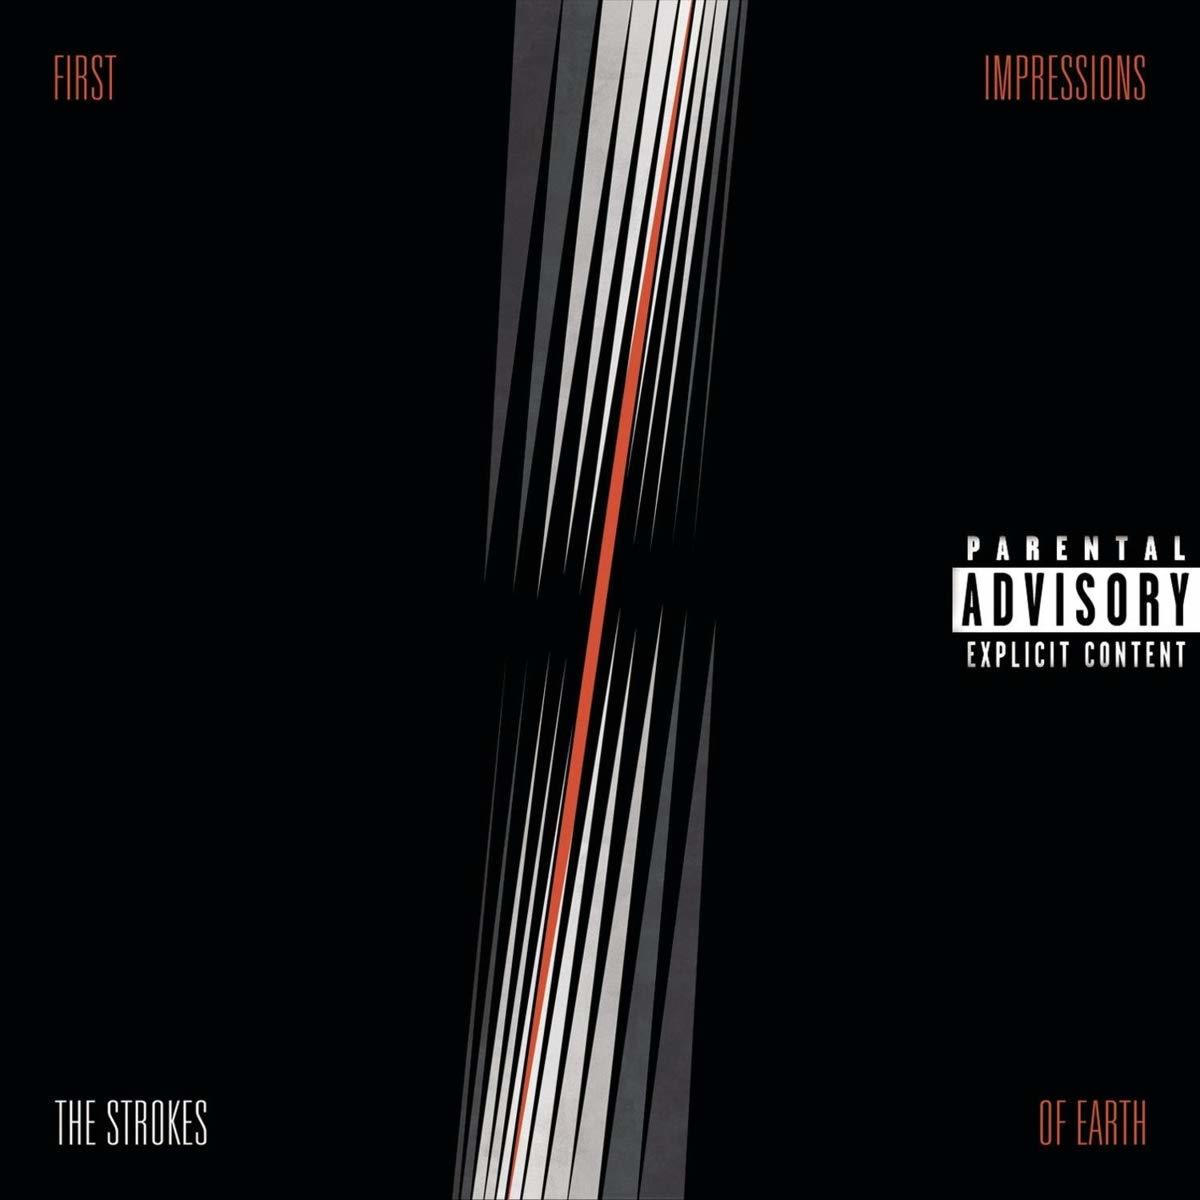 The Strokes - First Impressions - Of (Vinyl) Earth